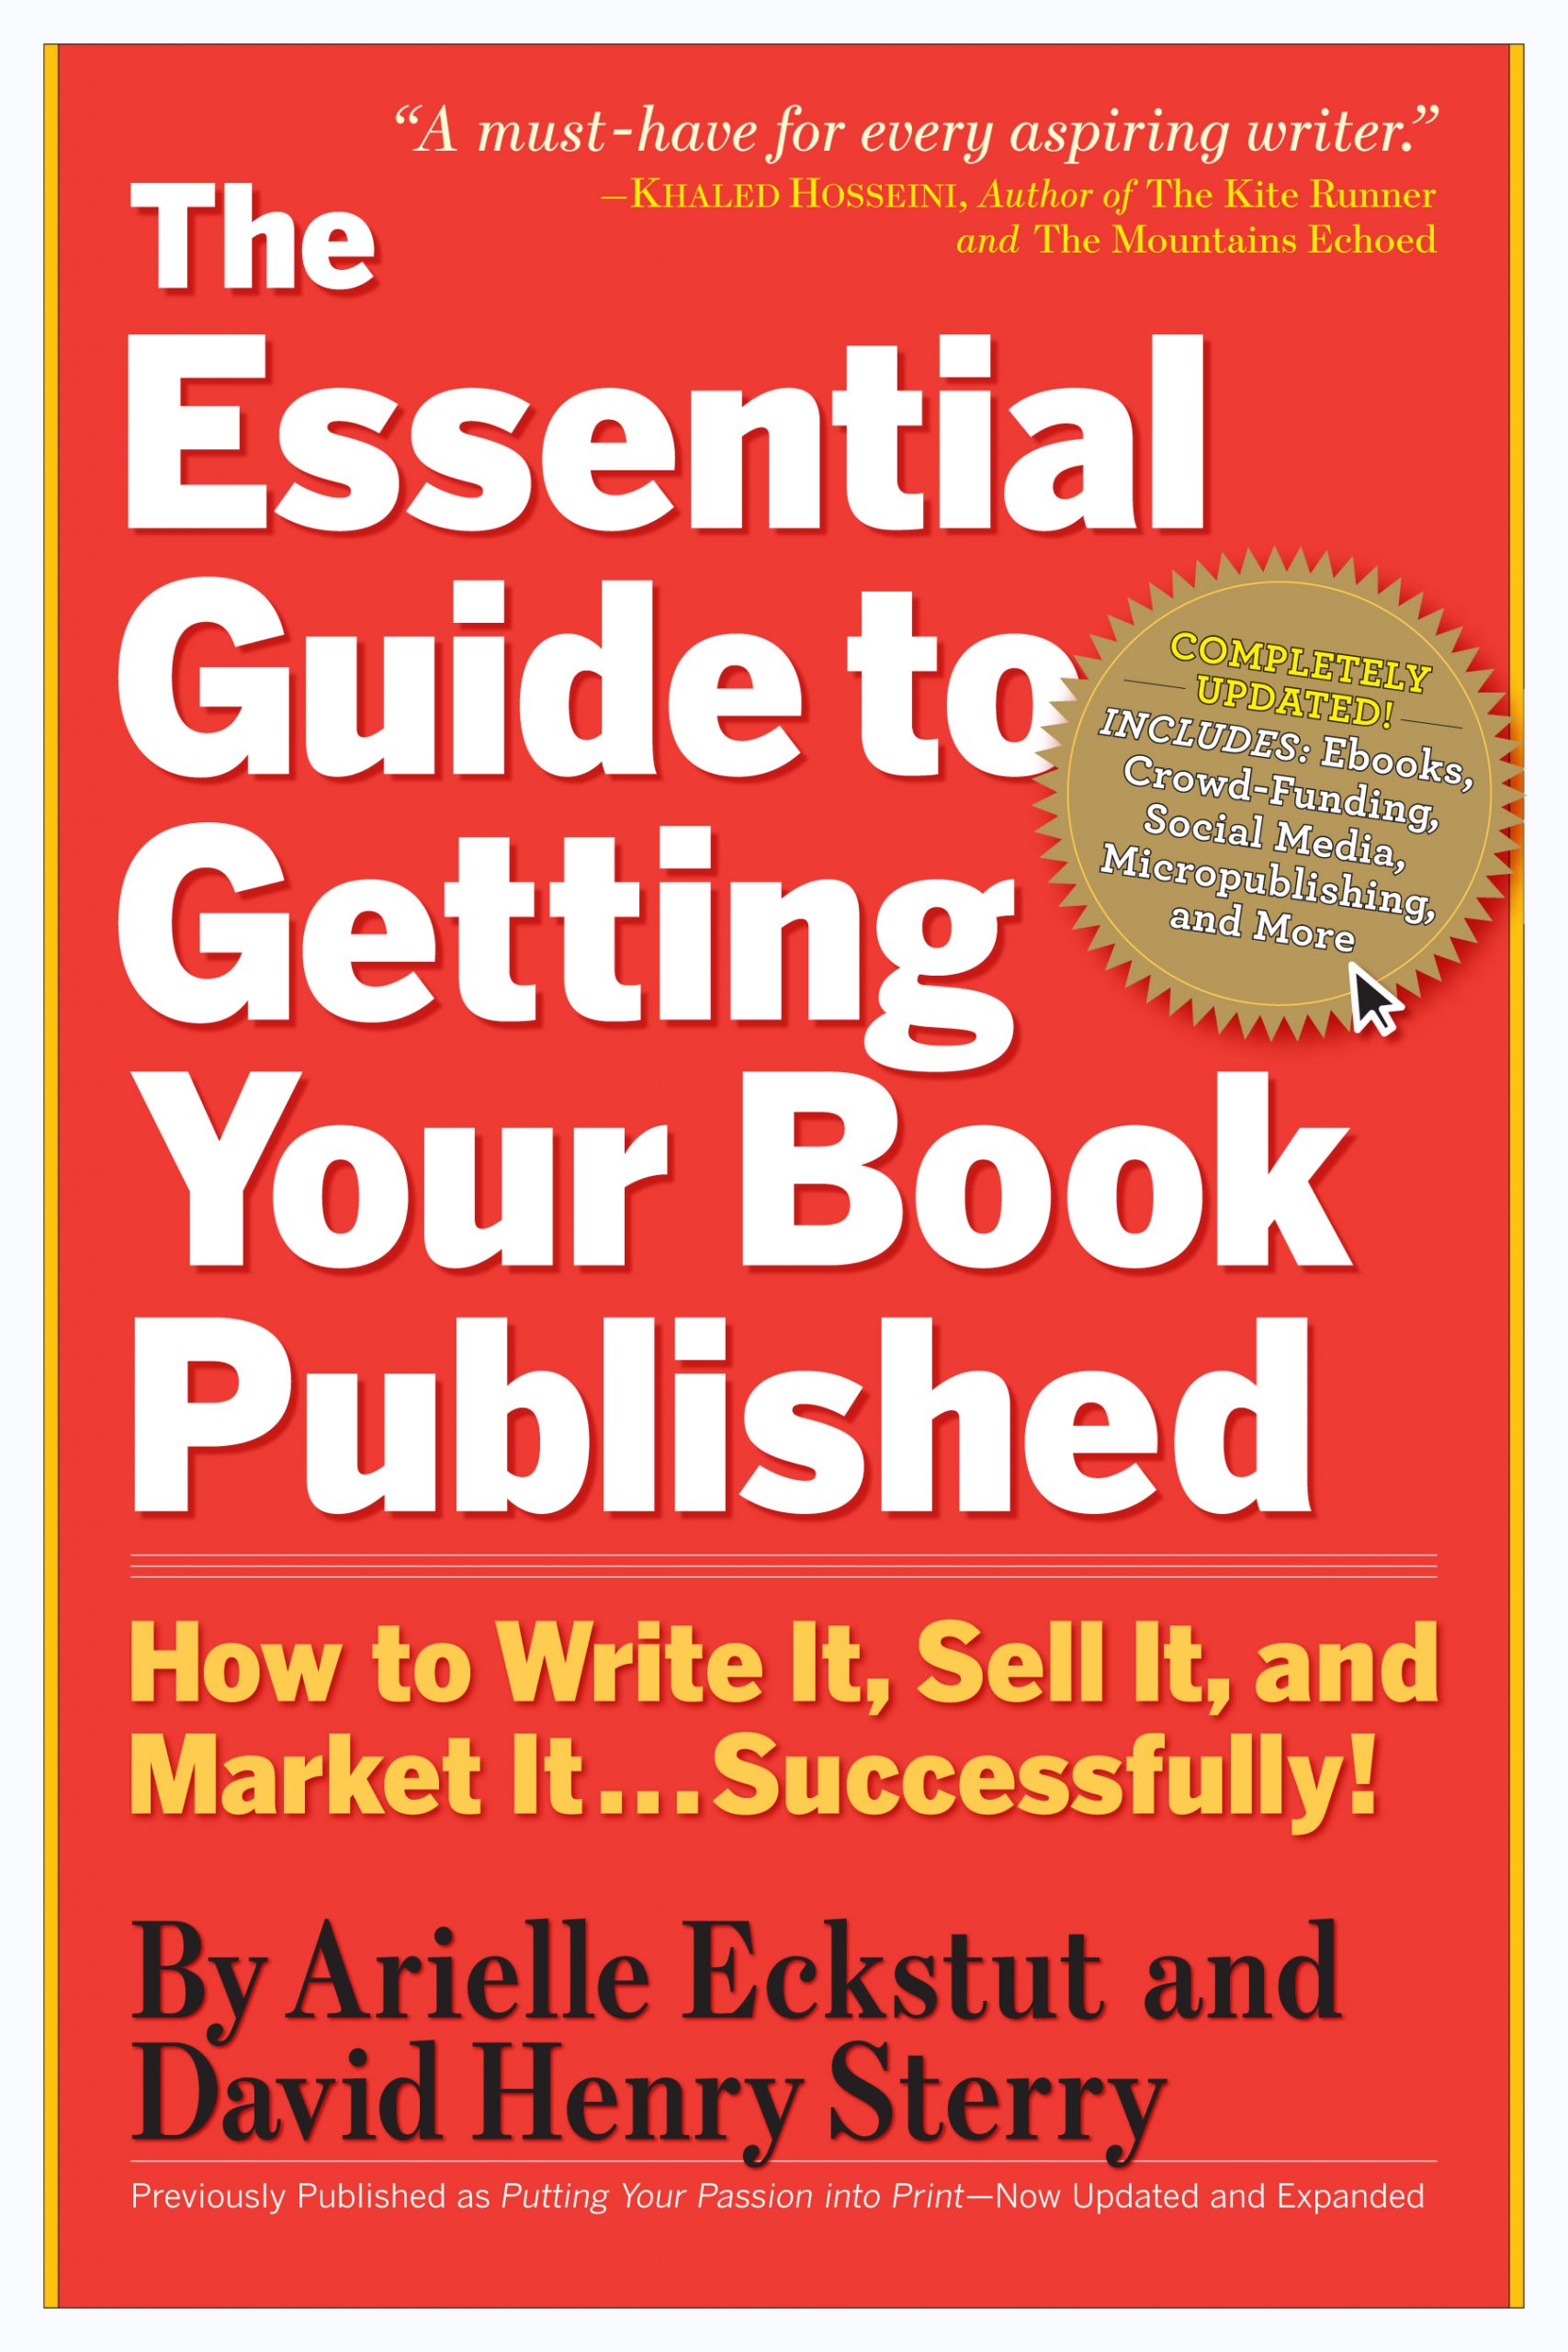 The Essential Guide to Getting Your Book Published by Arielle Eckstut